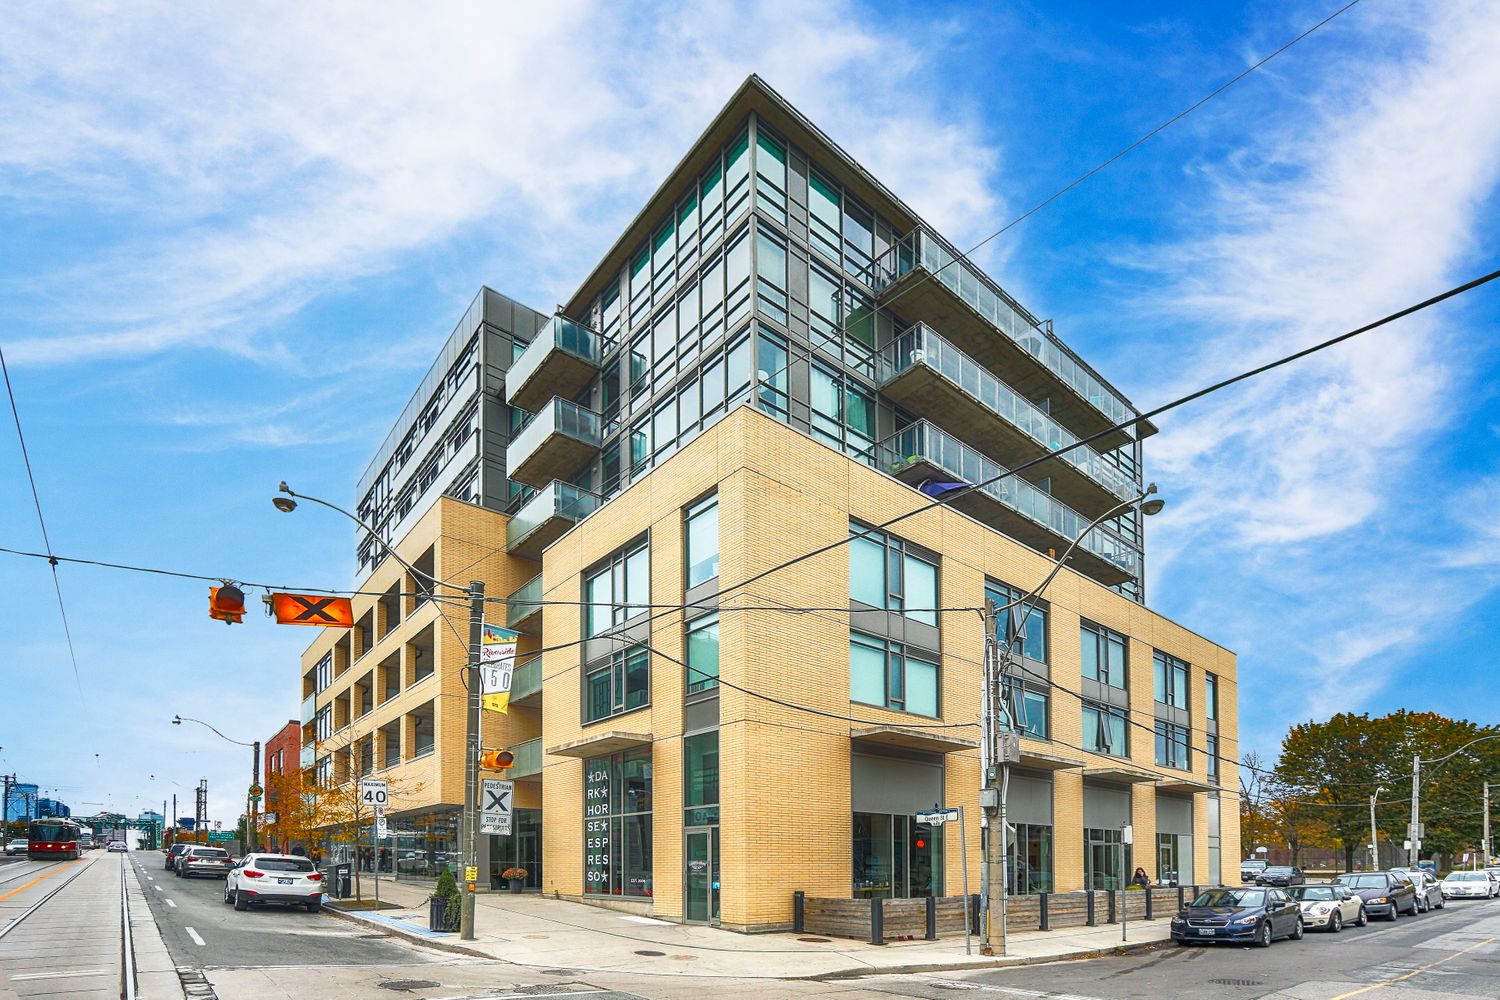 630 Queen Street E. Sync Lofts is located in  East End, Toronto - image #1 of 6